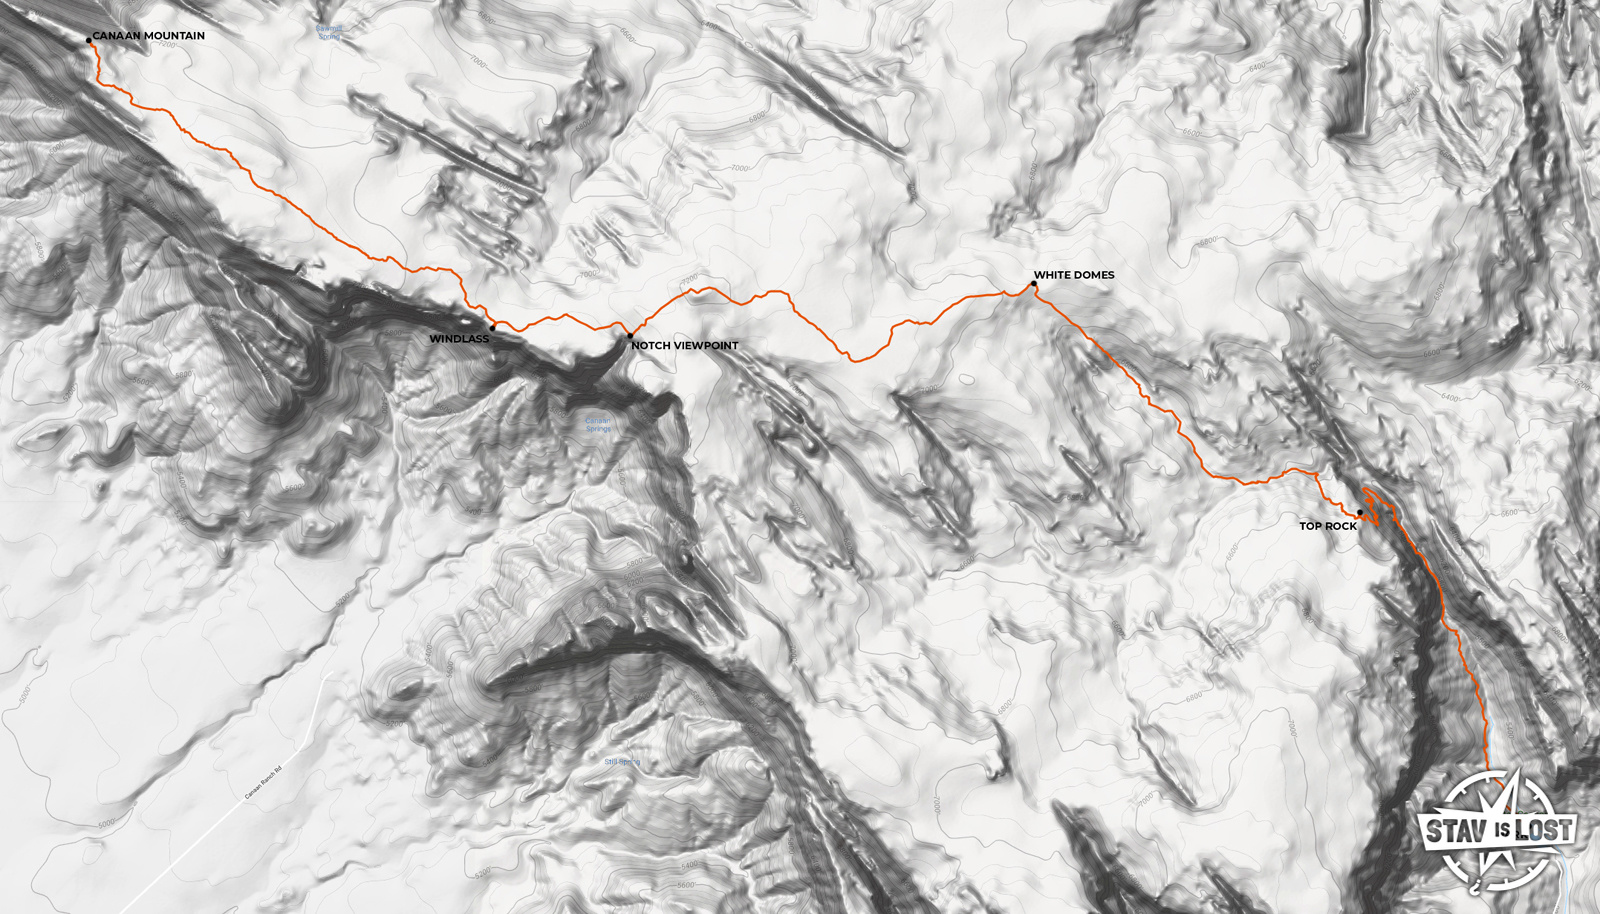 map for Canaan Mountain via Water Canyon and White Domes by stav is lost